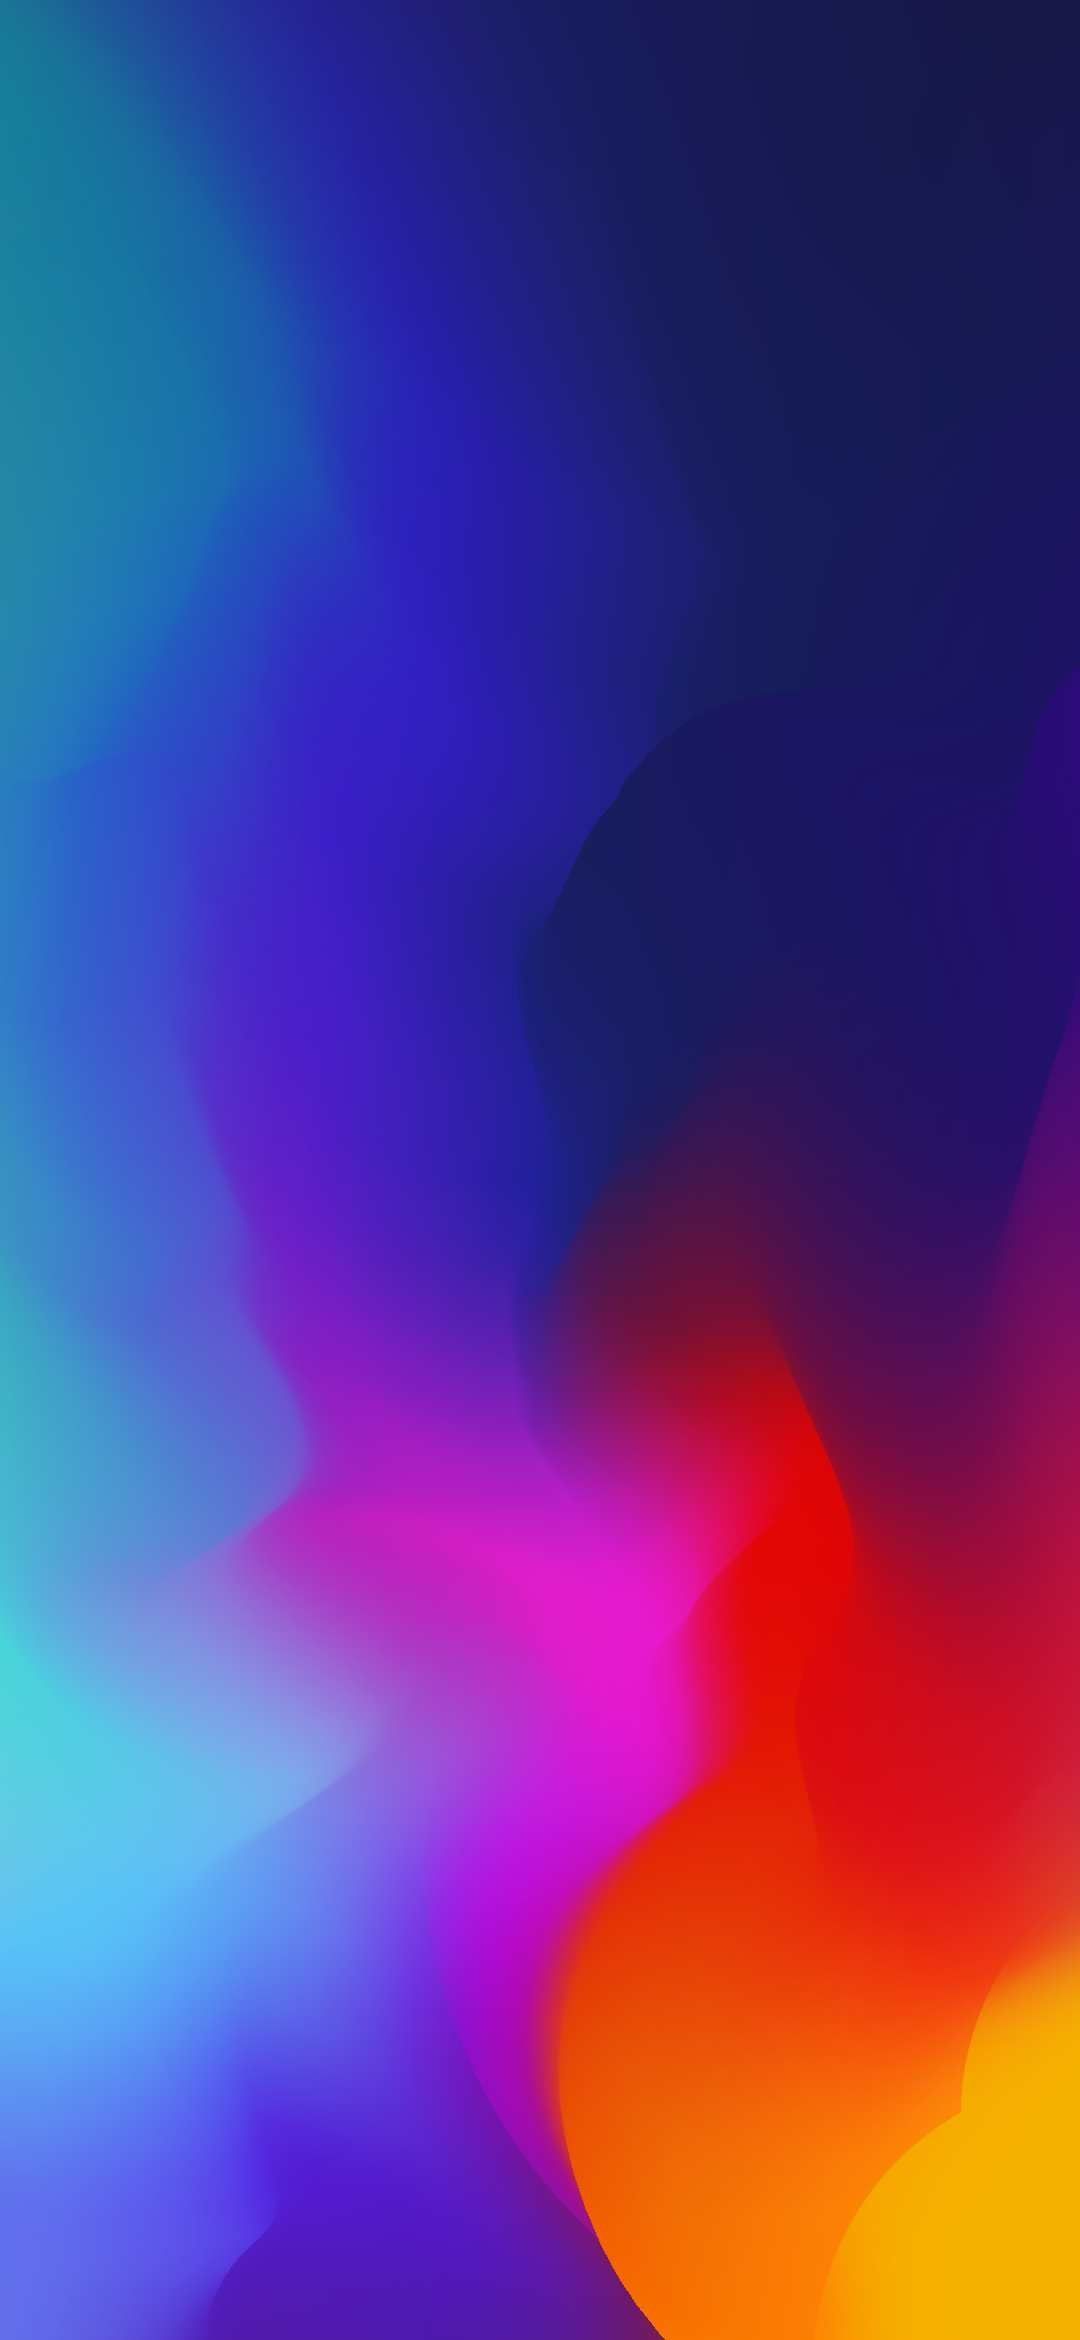 ✓[100+] Lenovo Z6 Youth Mobile Stock Wallpaper 02 - 1080 x 2340 - Android /  iPhone HD Wallpaper Background Download (png / jpg) (2023)